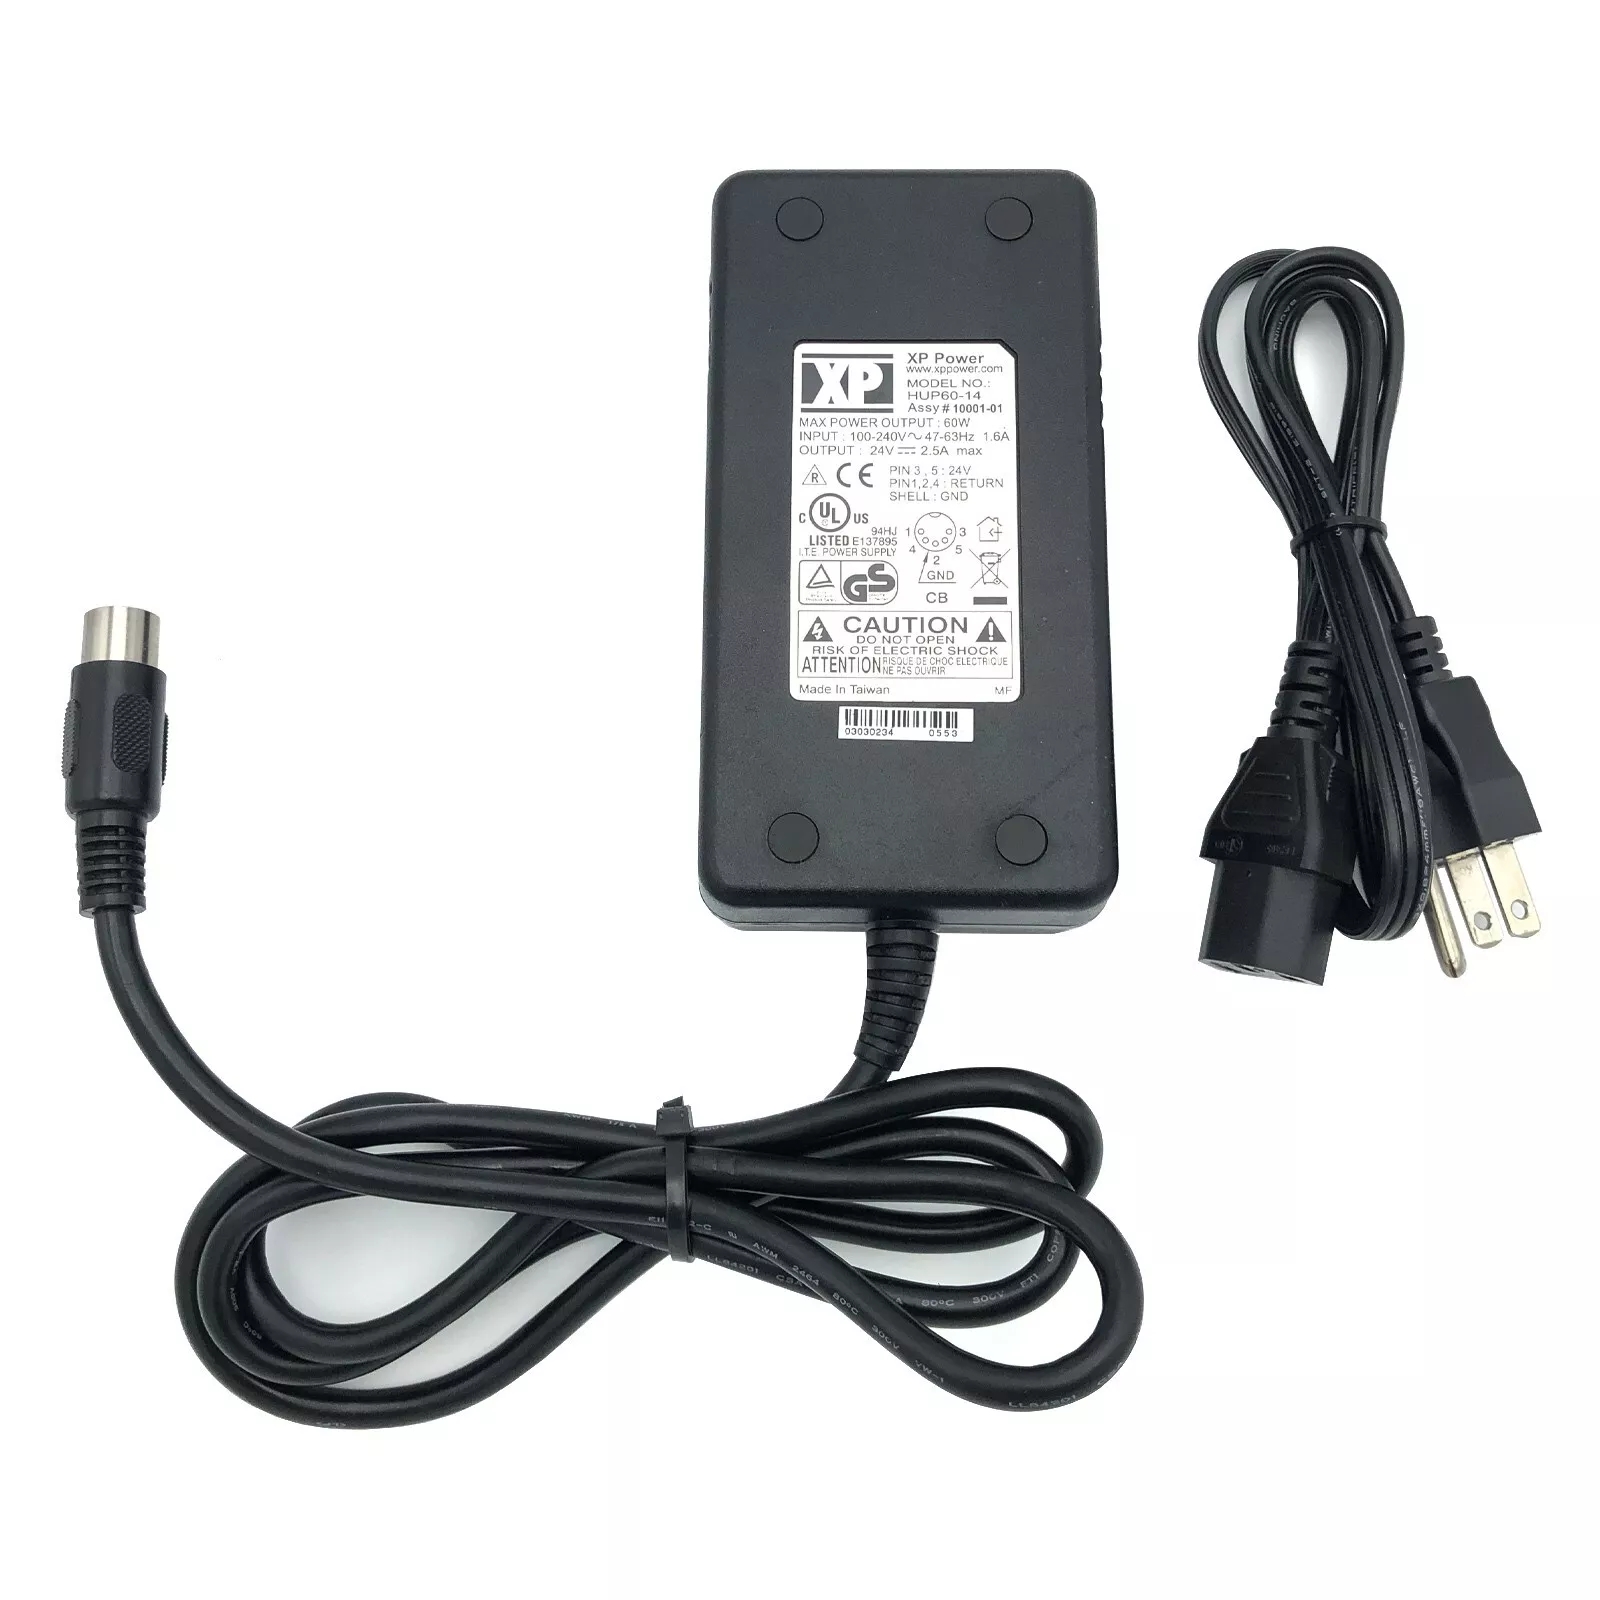 *Brand NEW*Genuine XP Power HUP60-14 24V 2.5A AC Adapter Power Supply 5Pin - Click Image to Close